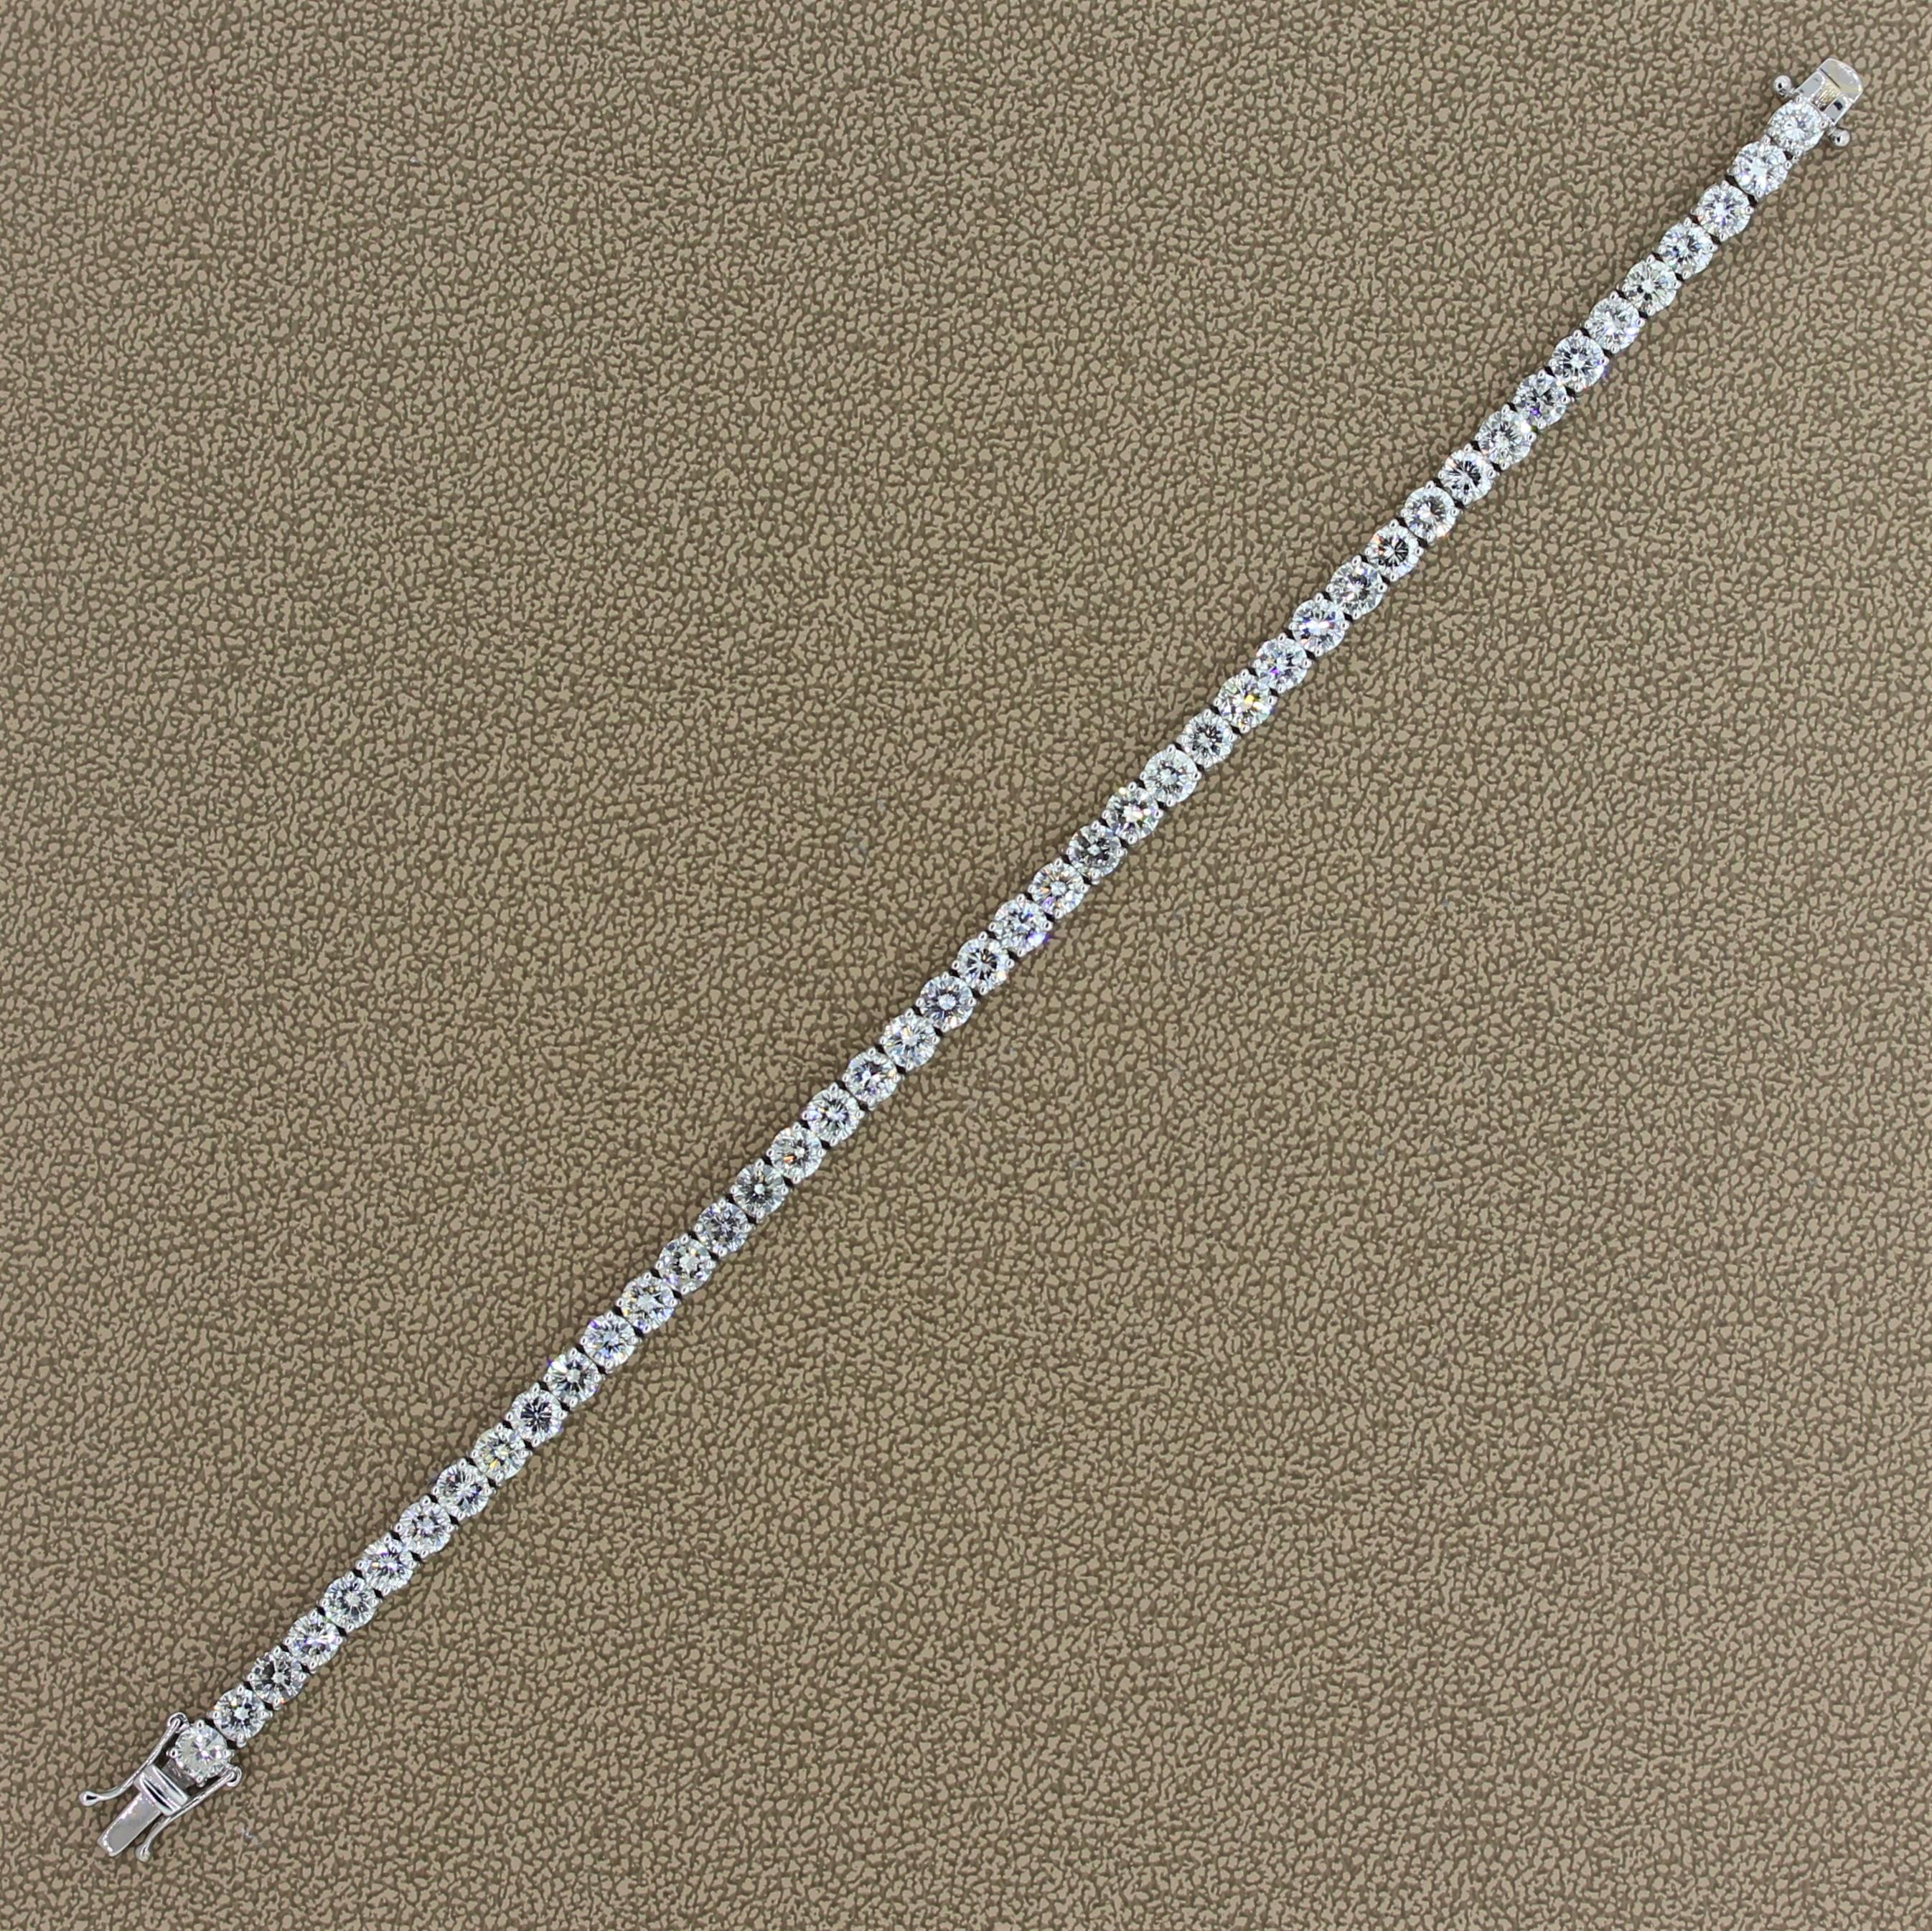 This classic tennis bracelet features 11.38 carats of SI quality diamonds. The round cut colorless diamonds are prong set in an 18K white gold setting. A box clasp with two safety latches ensure for a secure closure.

Bracelet Length: 7.25 inches
